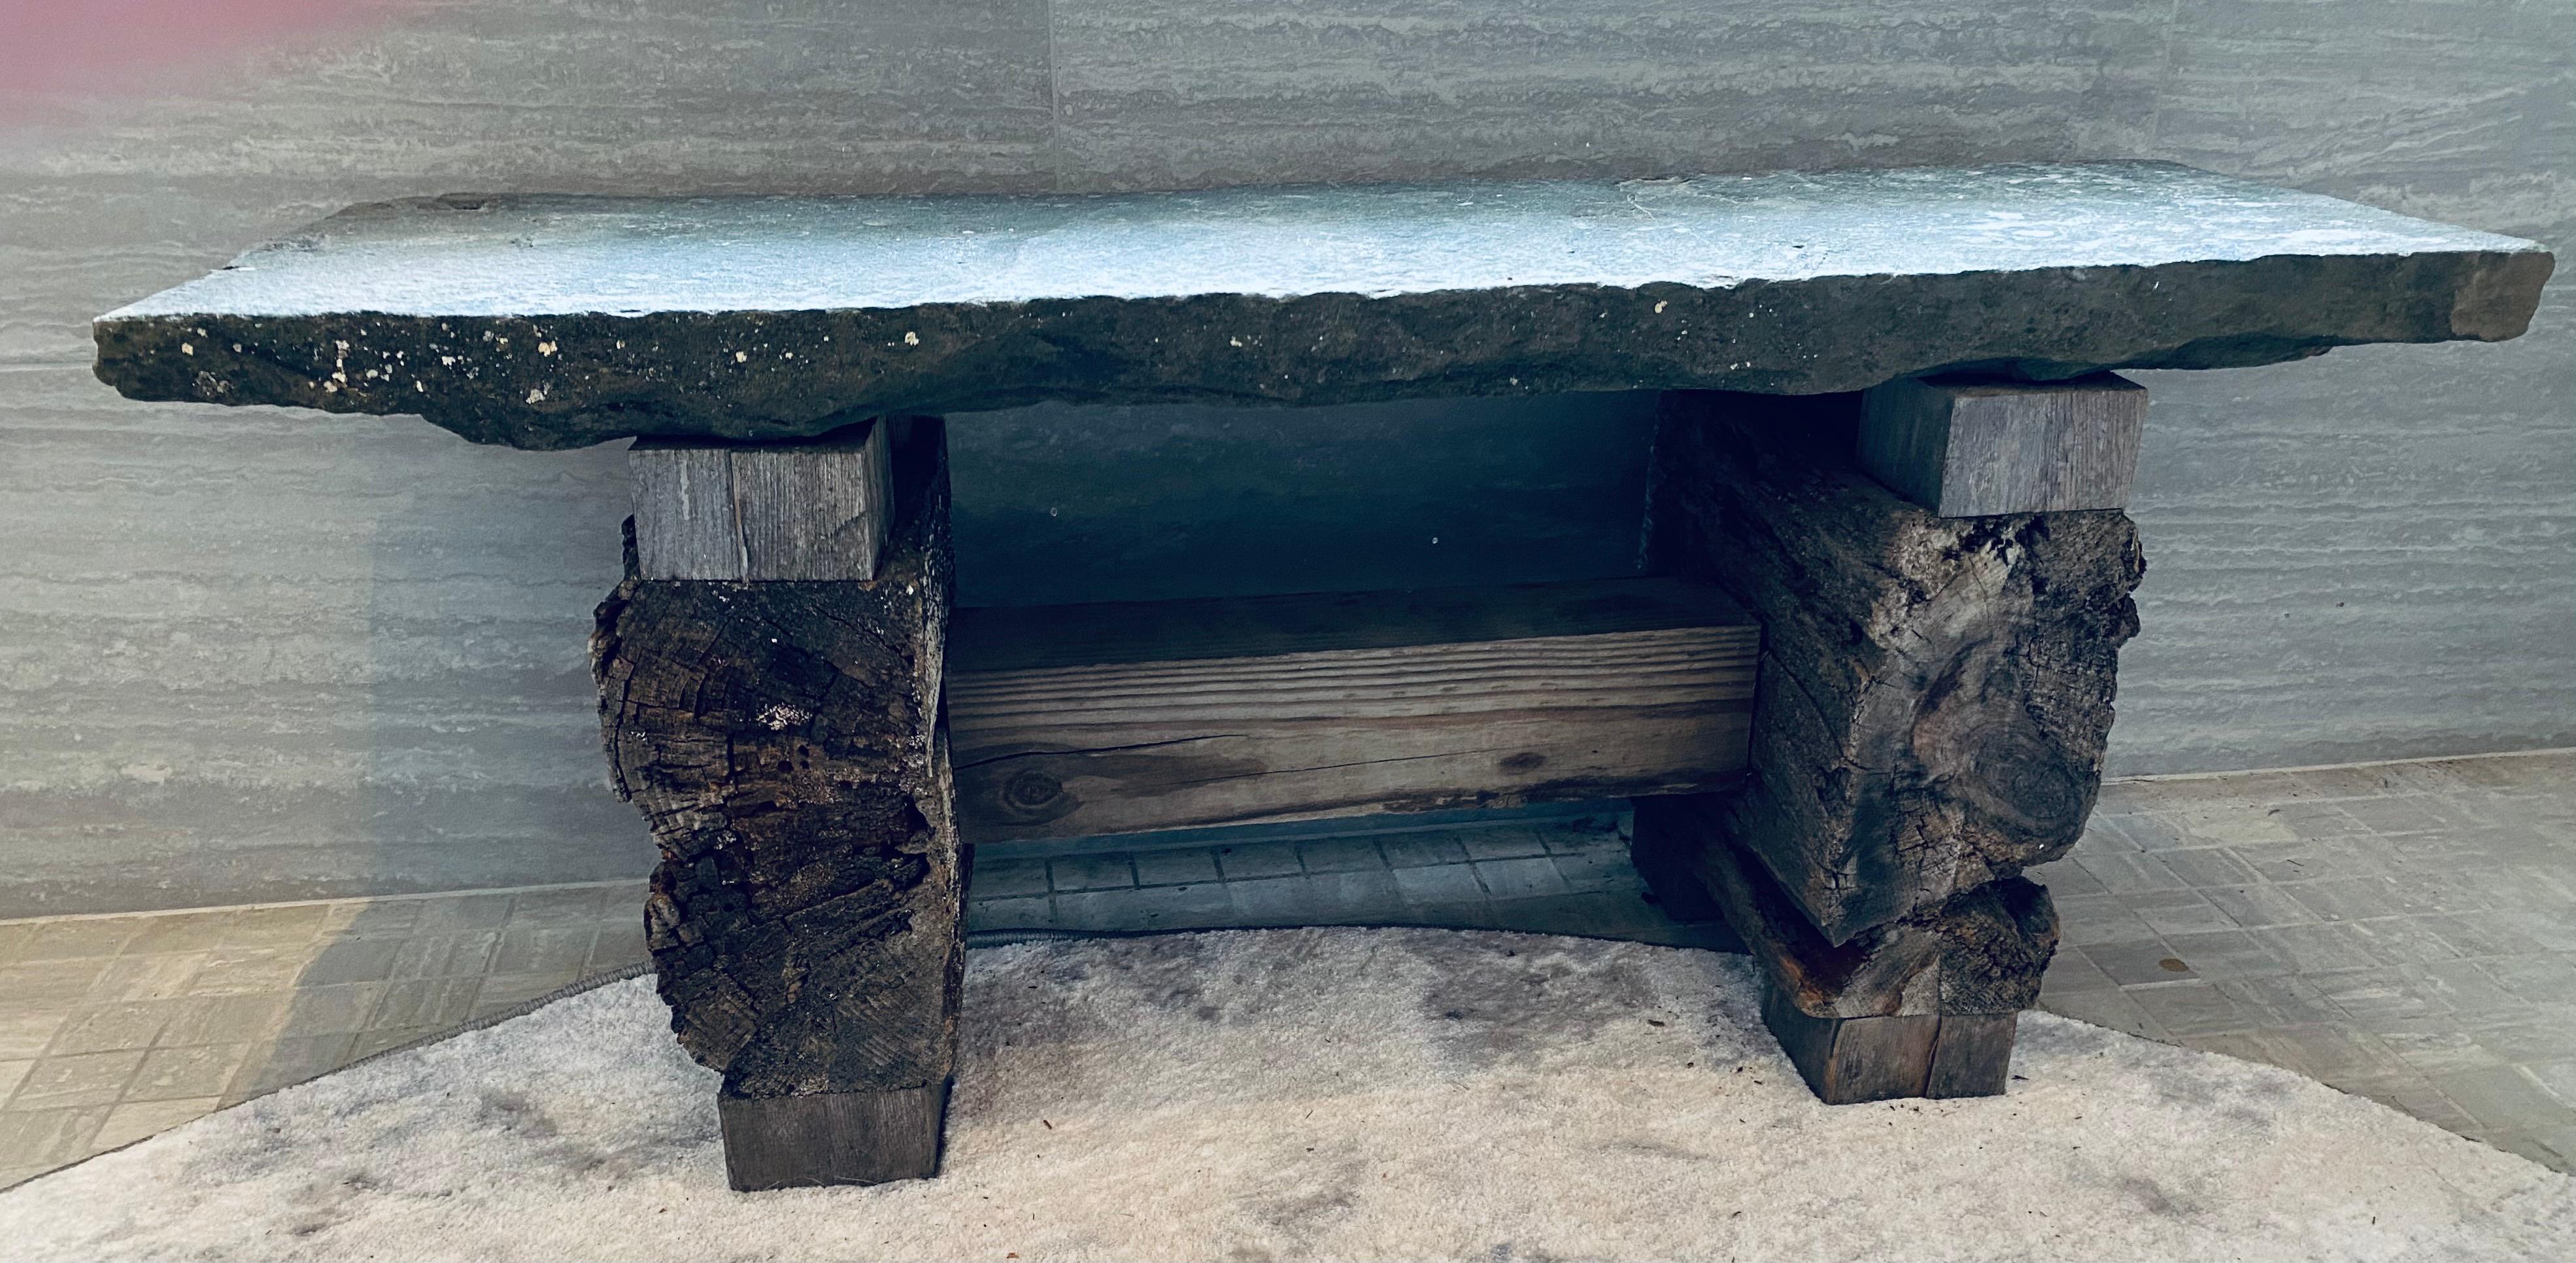 Integration of stone and reclaimed lumber in a Japanese style creates an immediate feel of weight and time. The bench offers a place to rest when slipping on a pair of comfortable slippers, or drying oneself after a hot bath. Allow us to build you